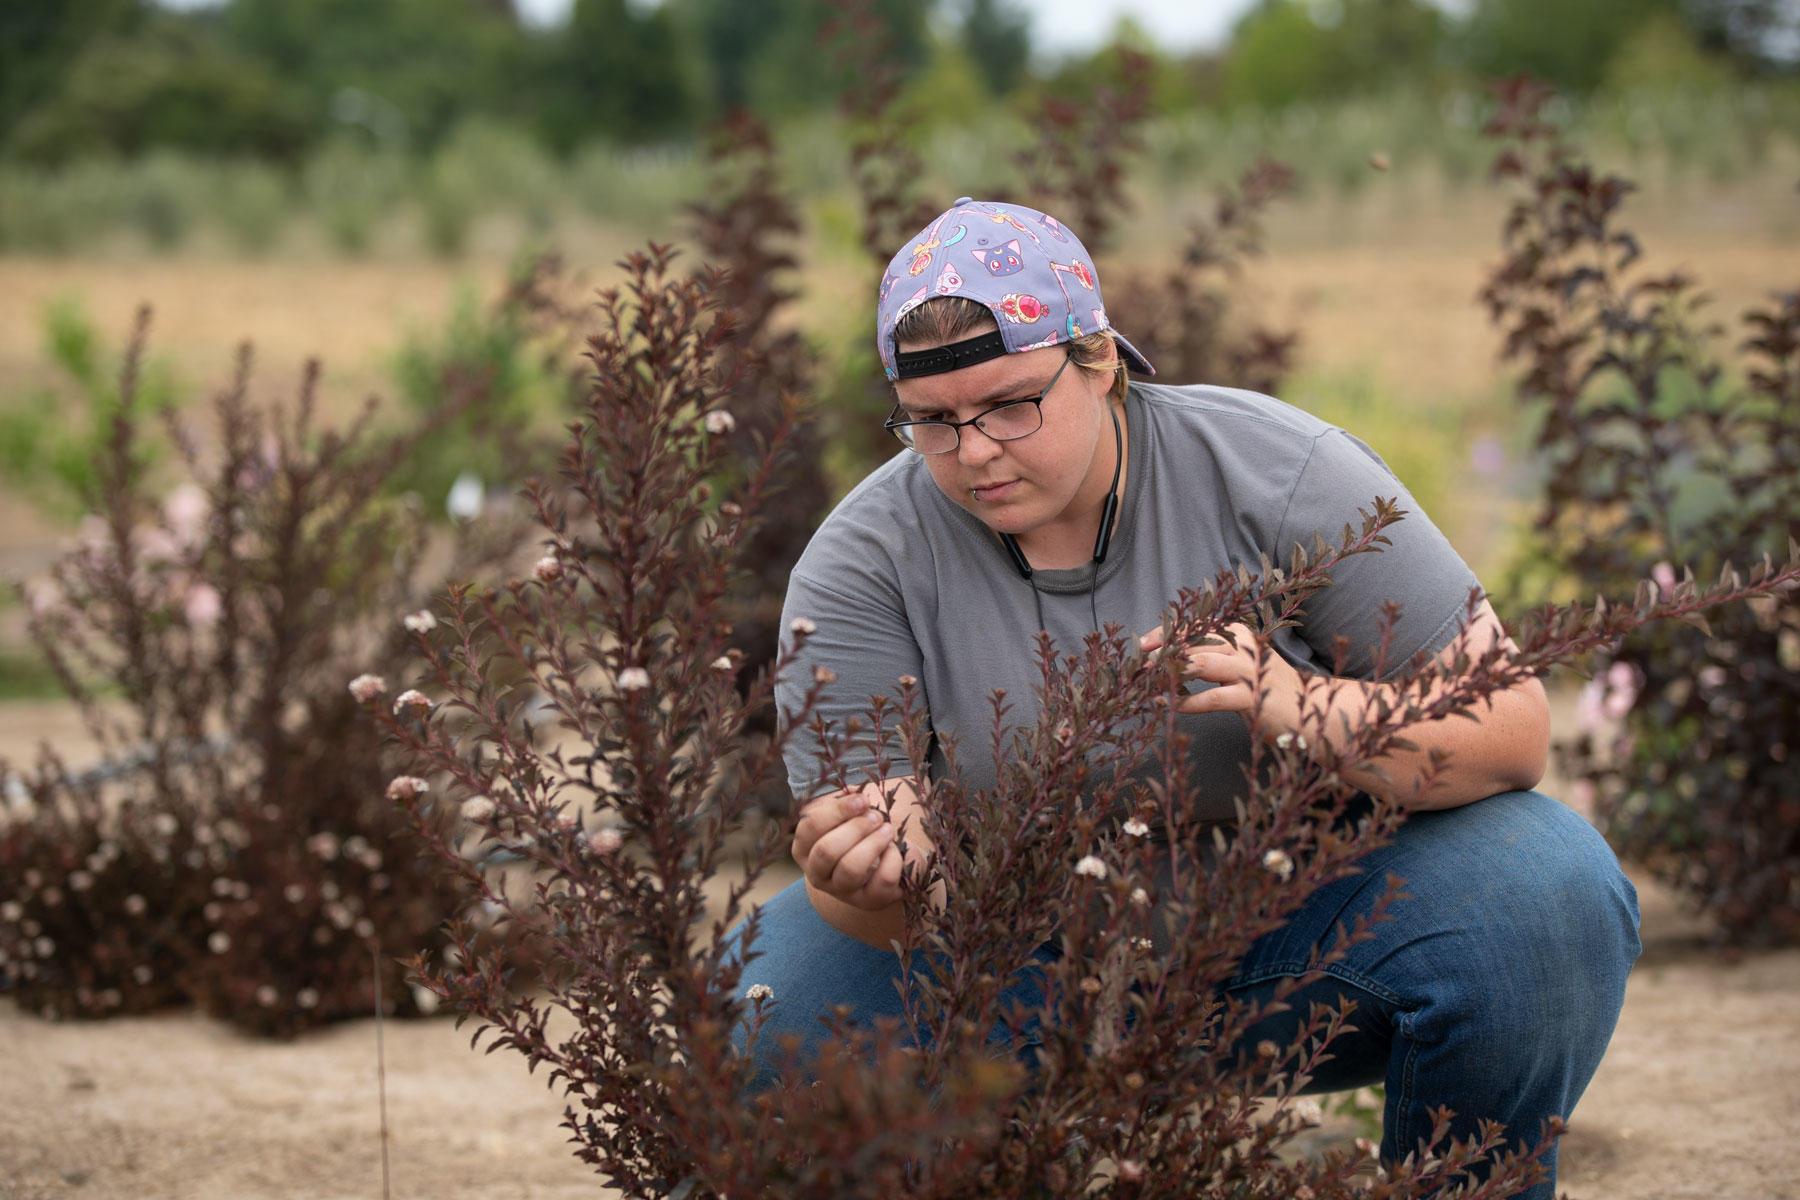 Sydney Eskew, a student employee in the Nackley Lab, inspects flower quality on a Little Devil ninebark shrub in a climate-ready landscape plant trial.